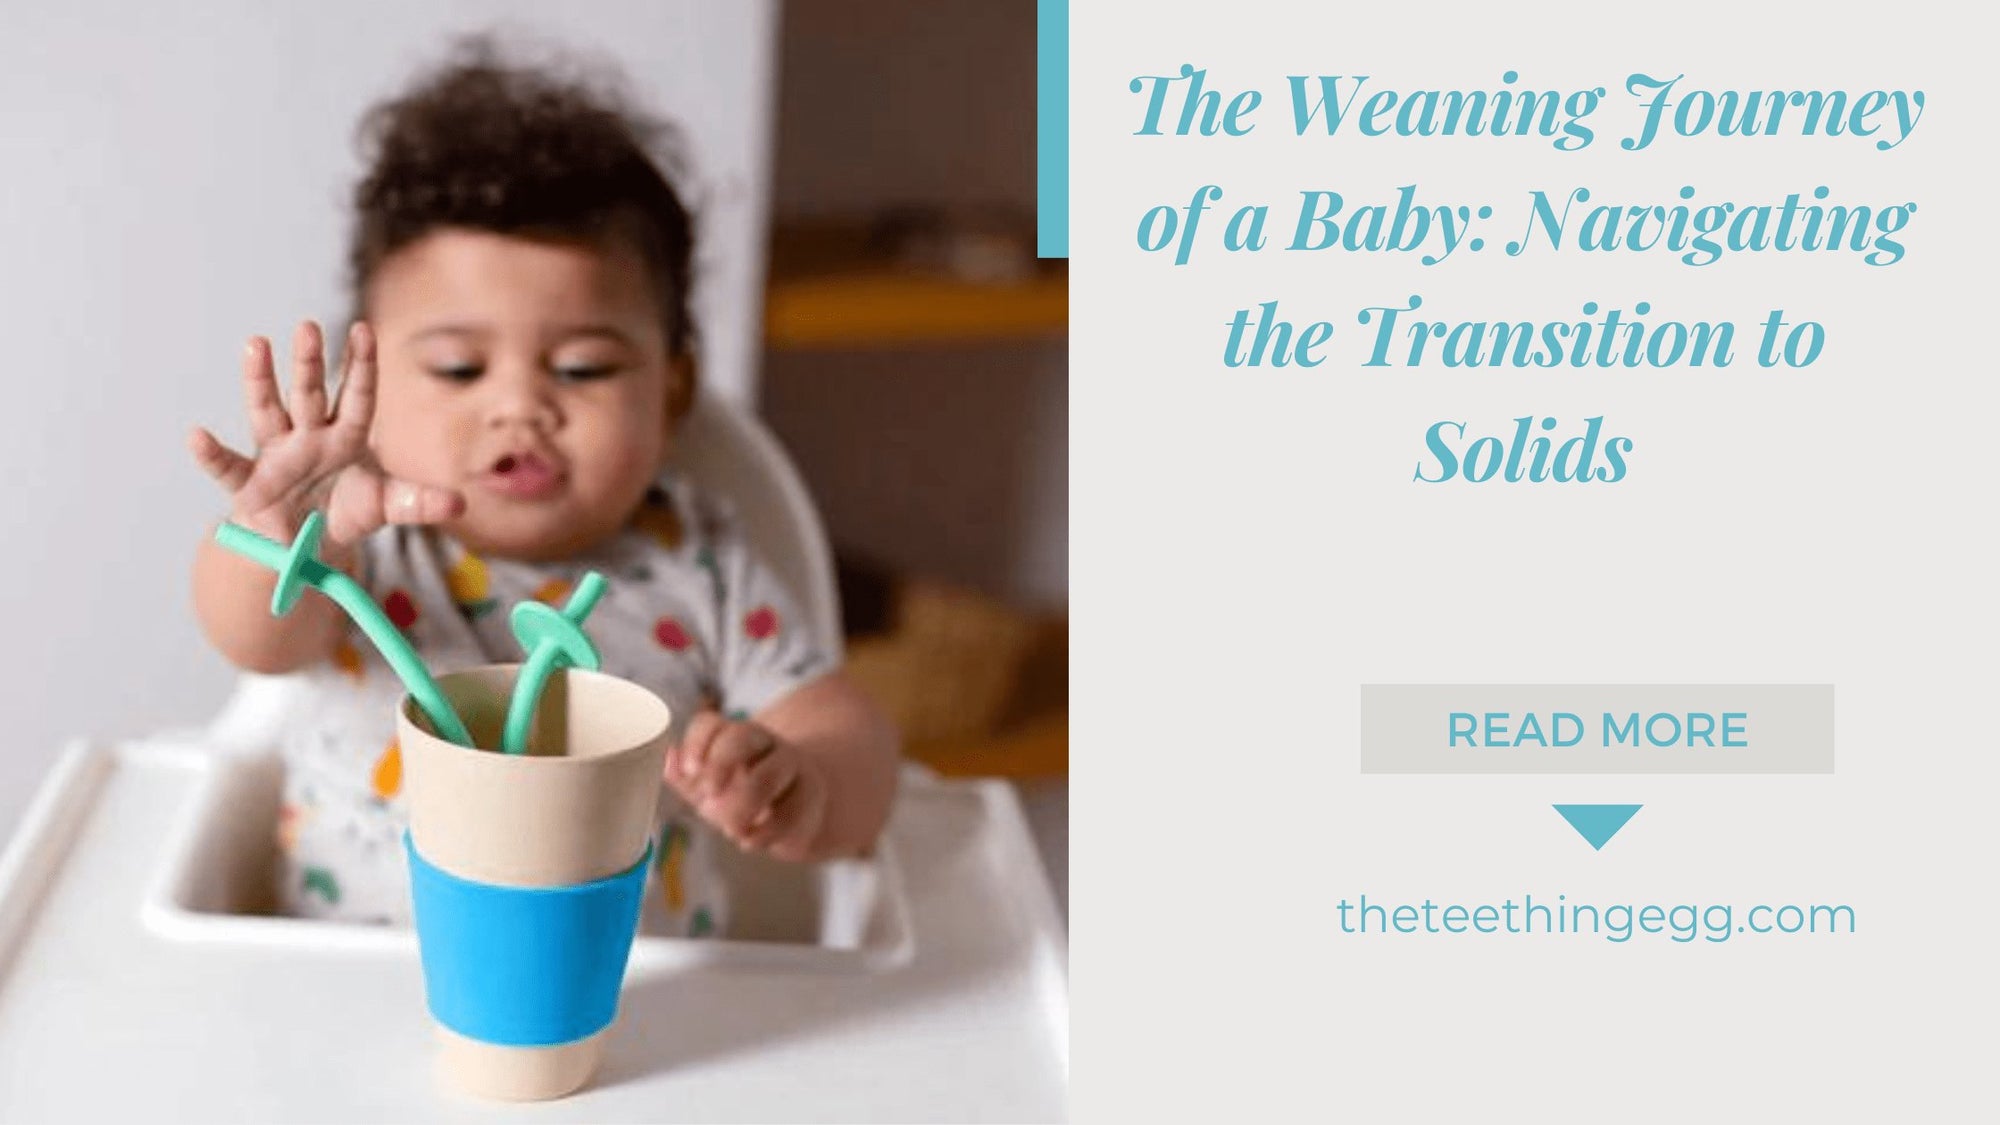 The Weaning Journey of a Baby: Navigating the Transition to Solids